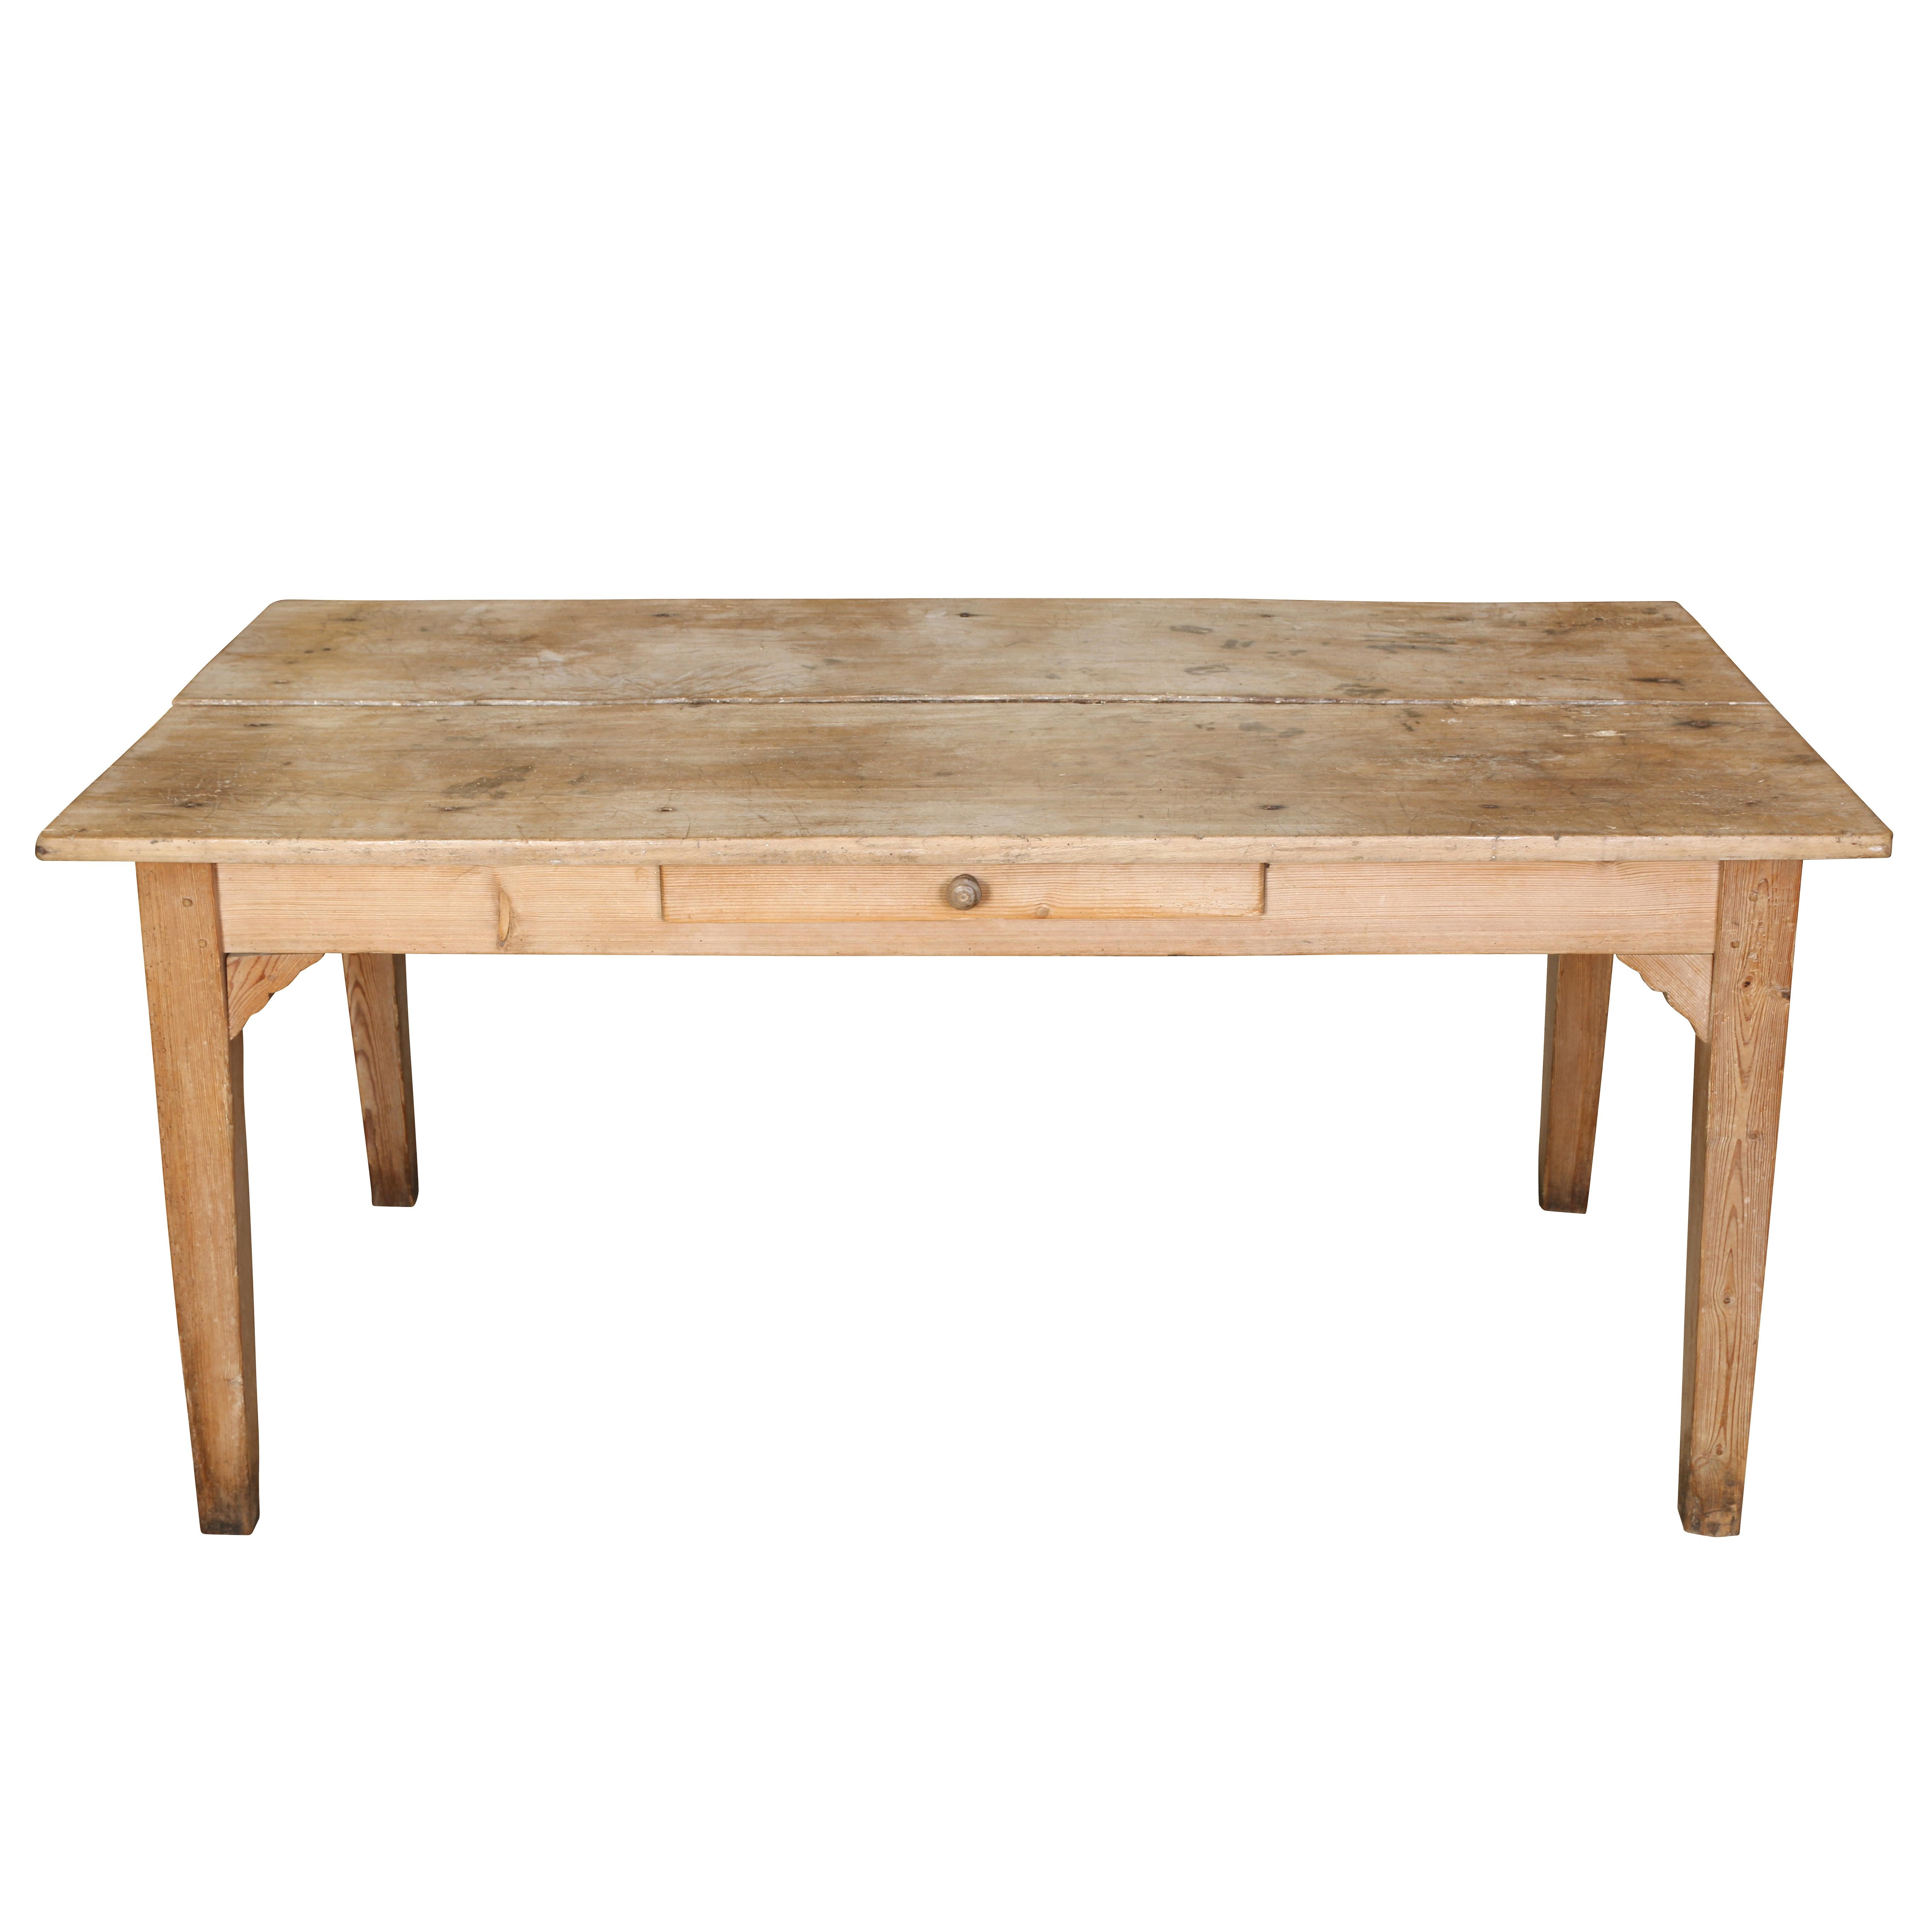 A simple yet beautiful pine dining table or work table that has acquired a lovely, warm patina over the years. The table its constructed in a straightforward way with block legs supported by decorative brackets. Its top is made of two planks of